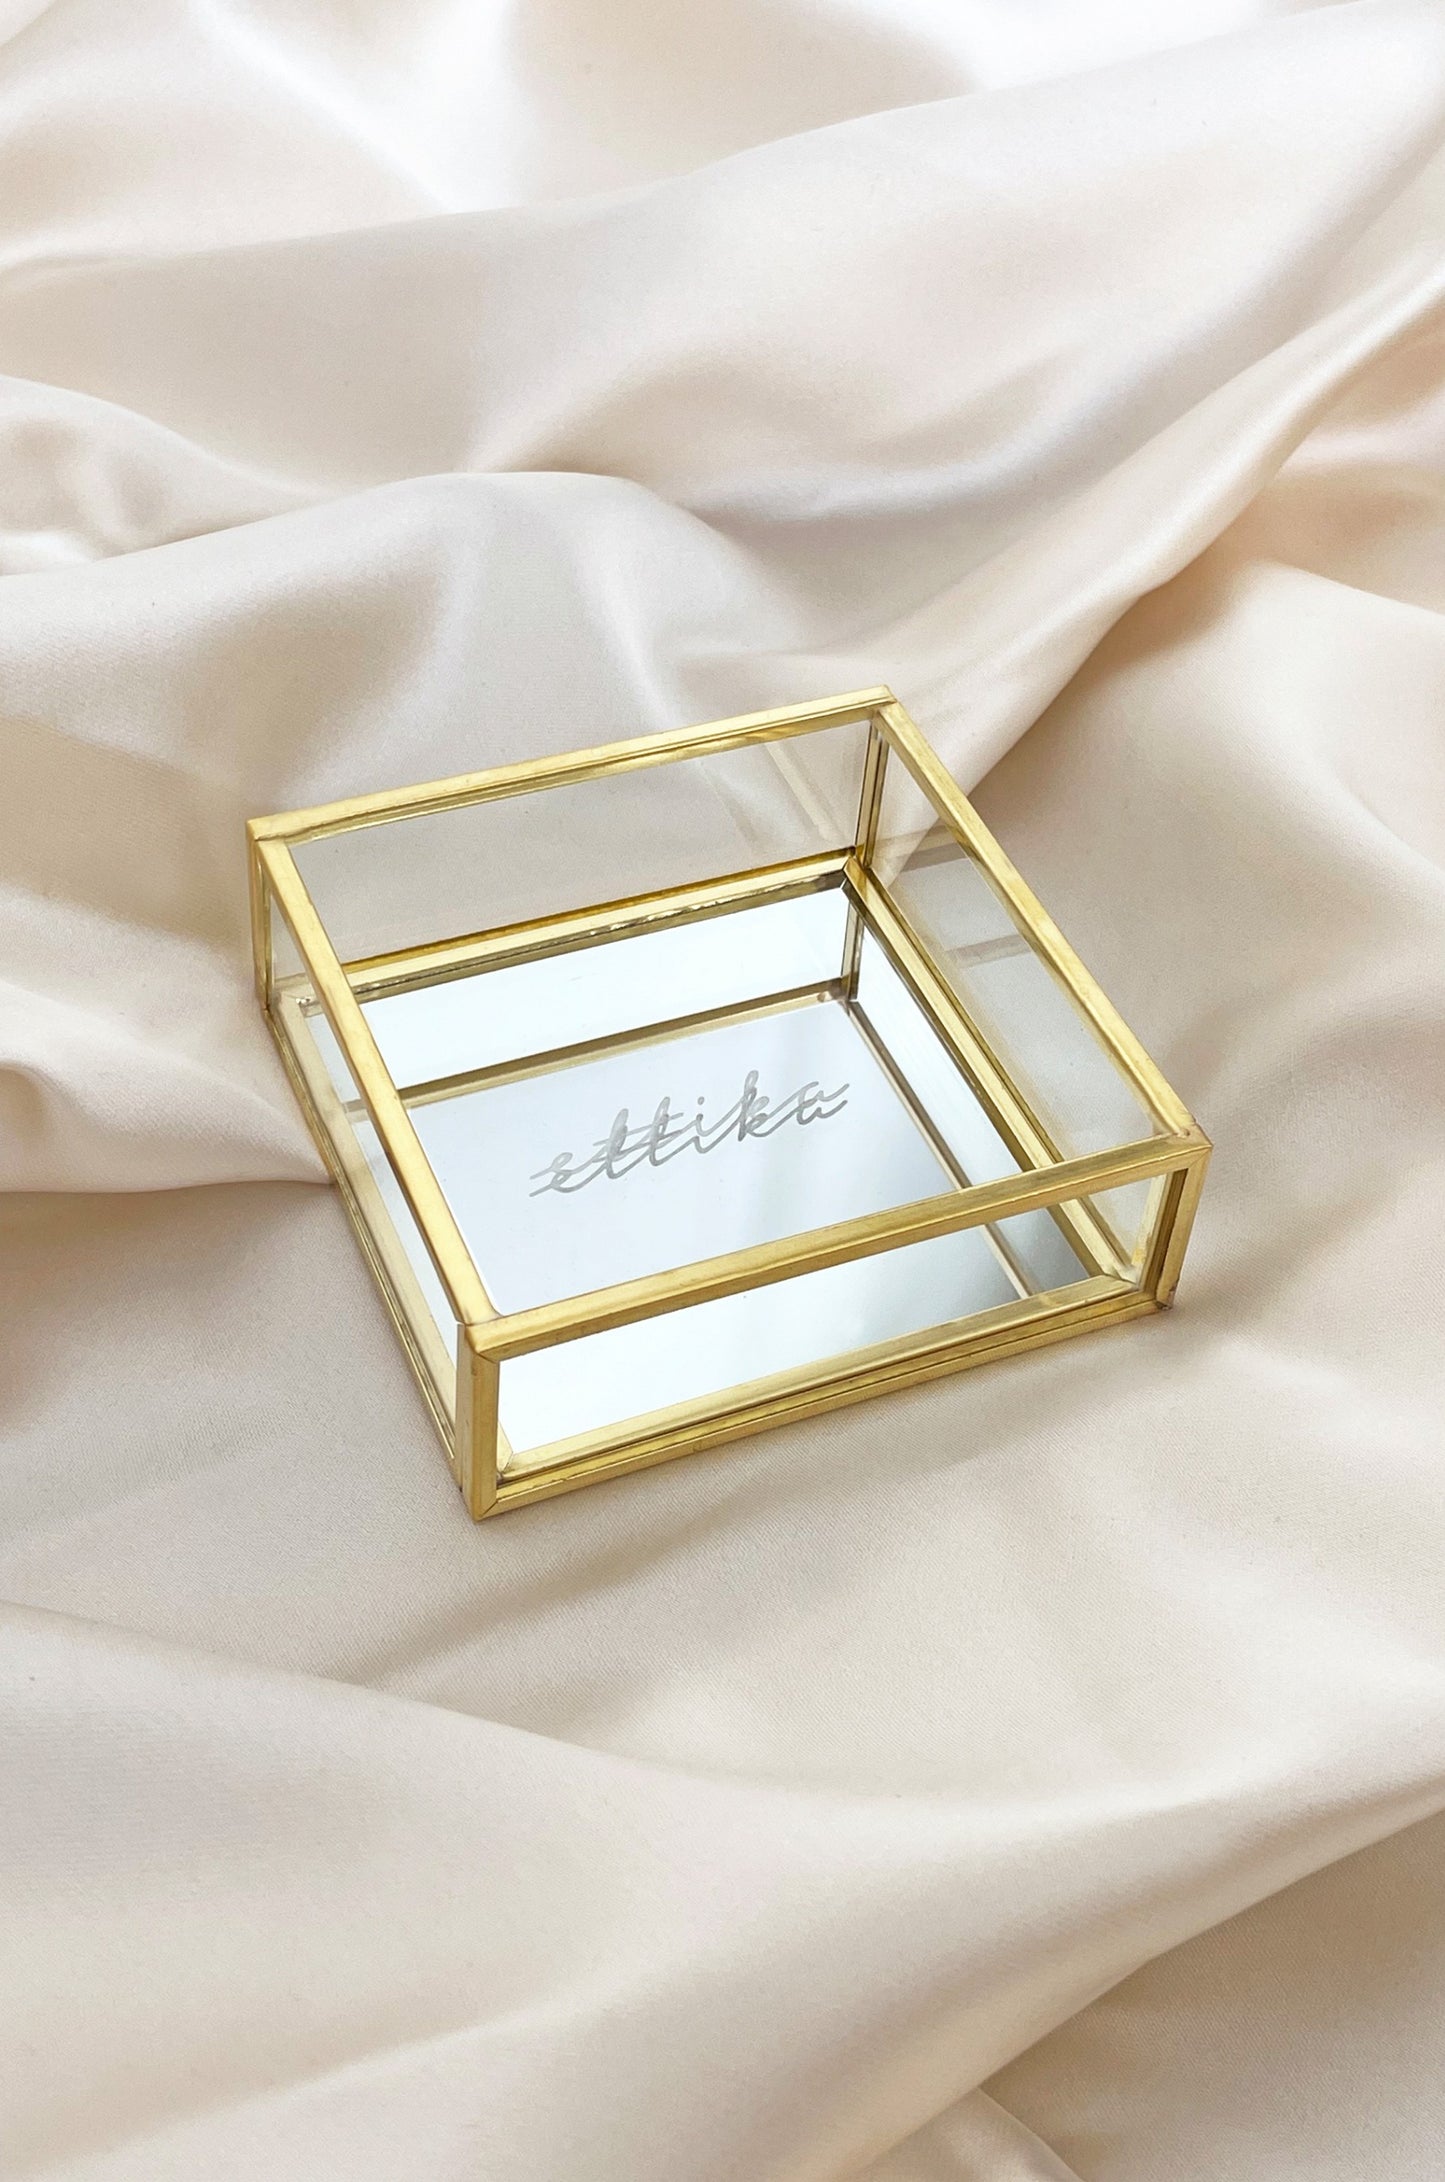 Small Square Mirror Bottom Jewelry and Display Box on satin